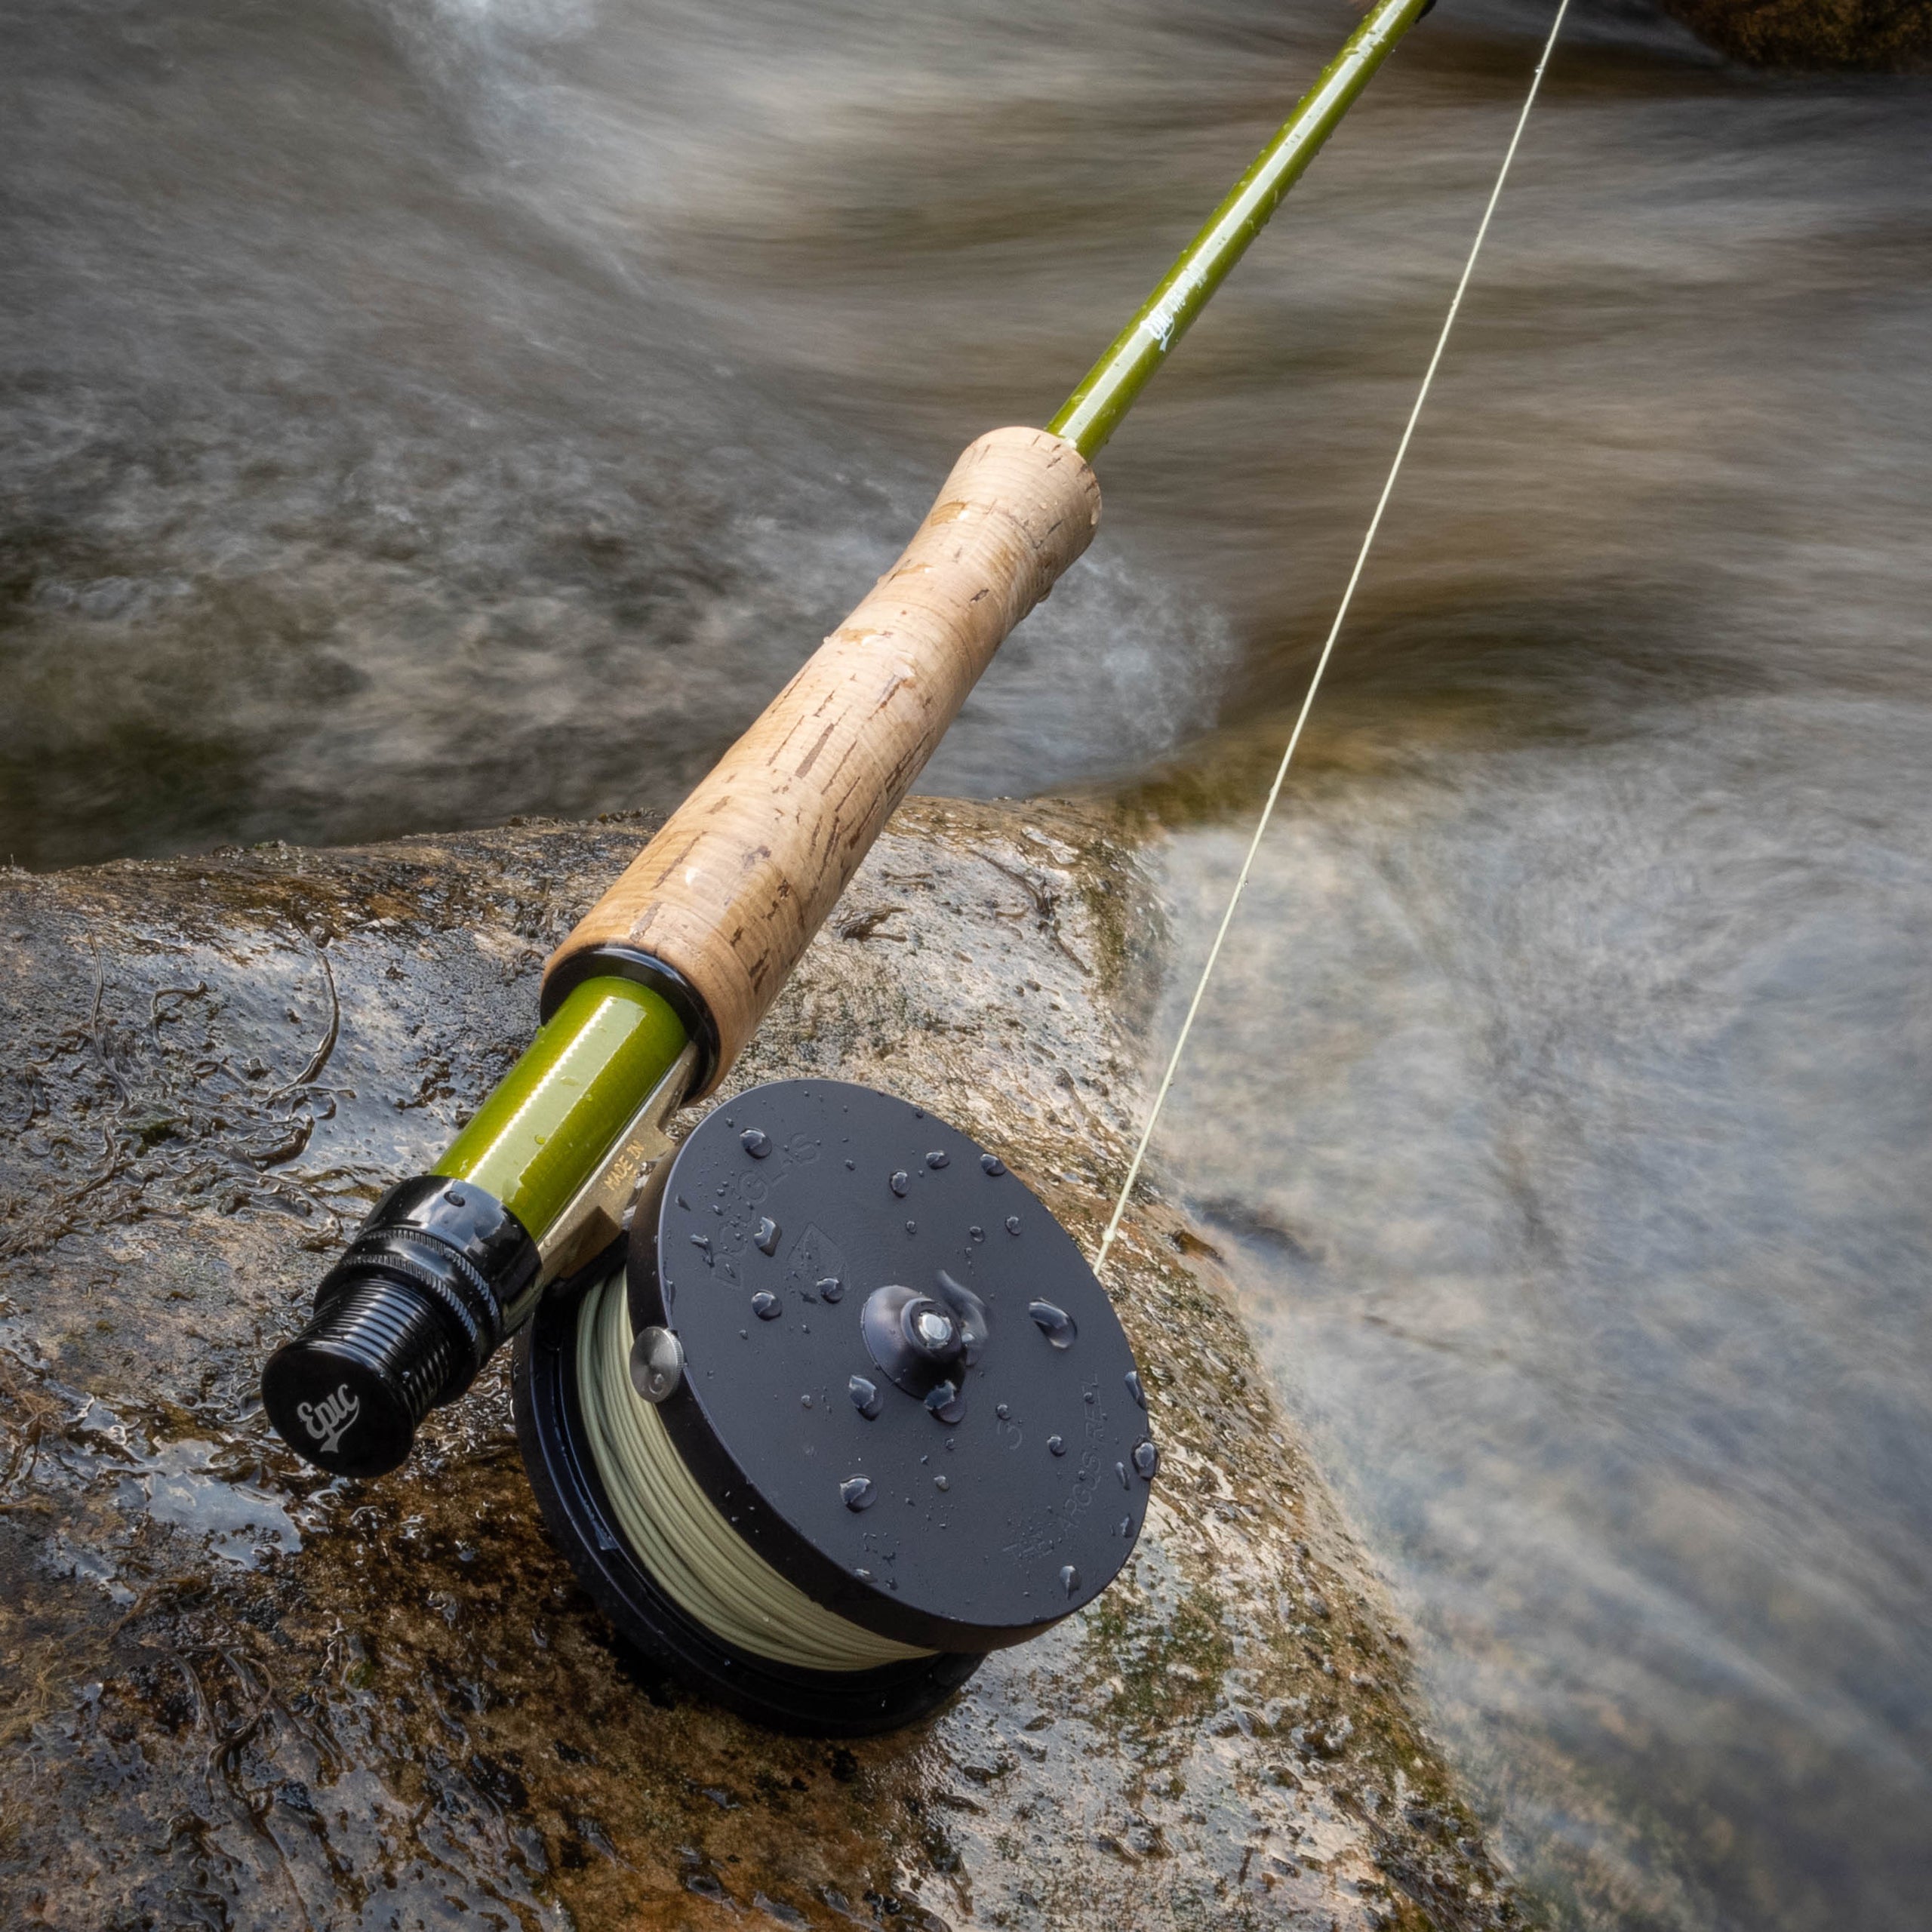 406 Fly Line - Weight Forward. Made in the US by Scientific